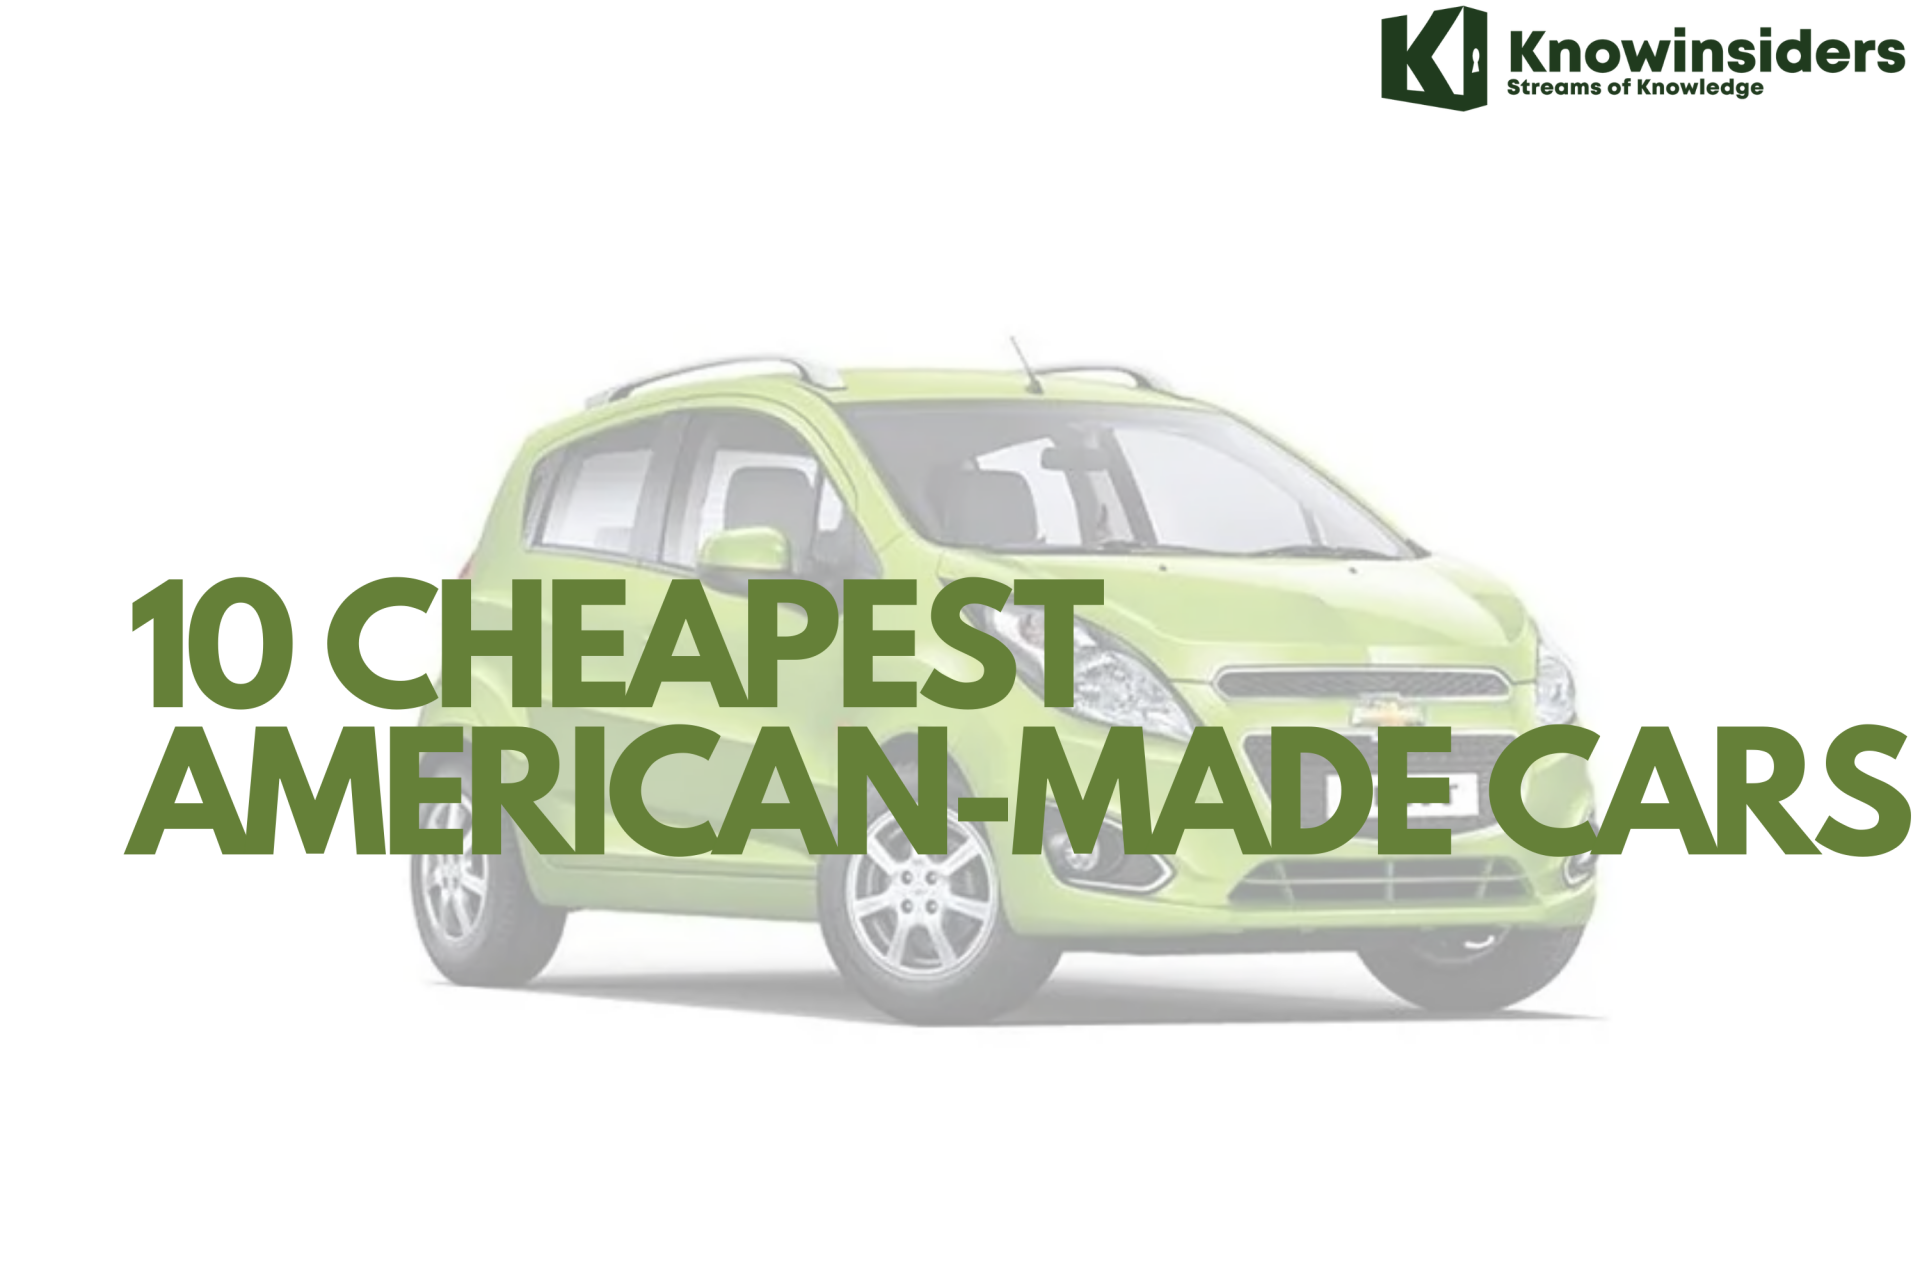 Top 10 Cheapest American-made Cars